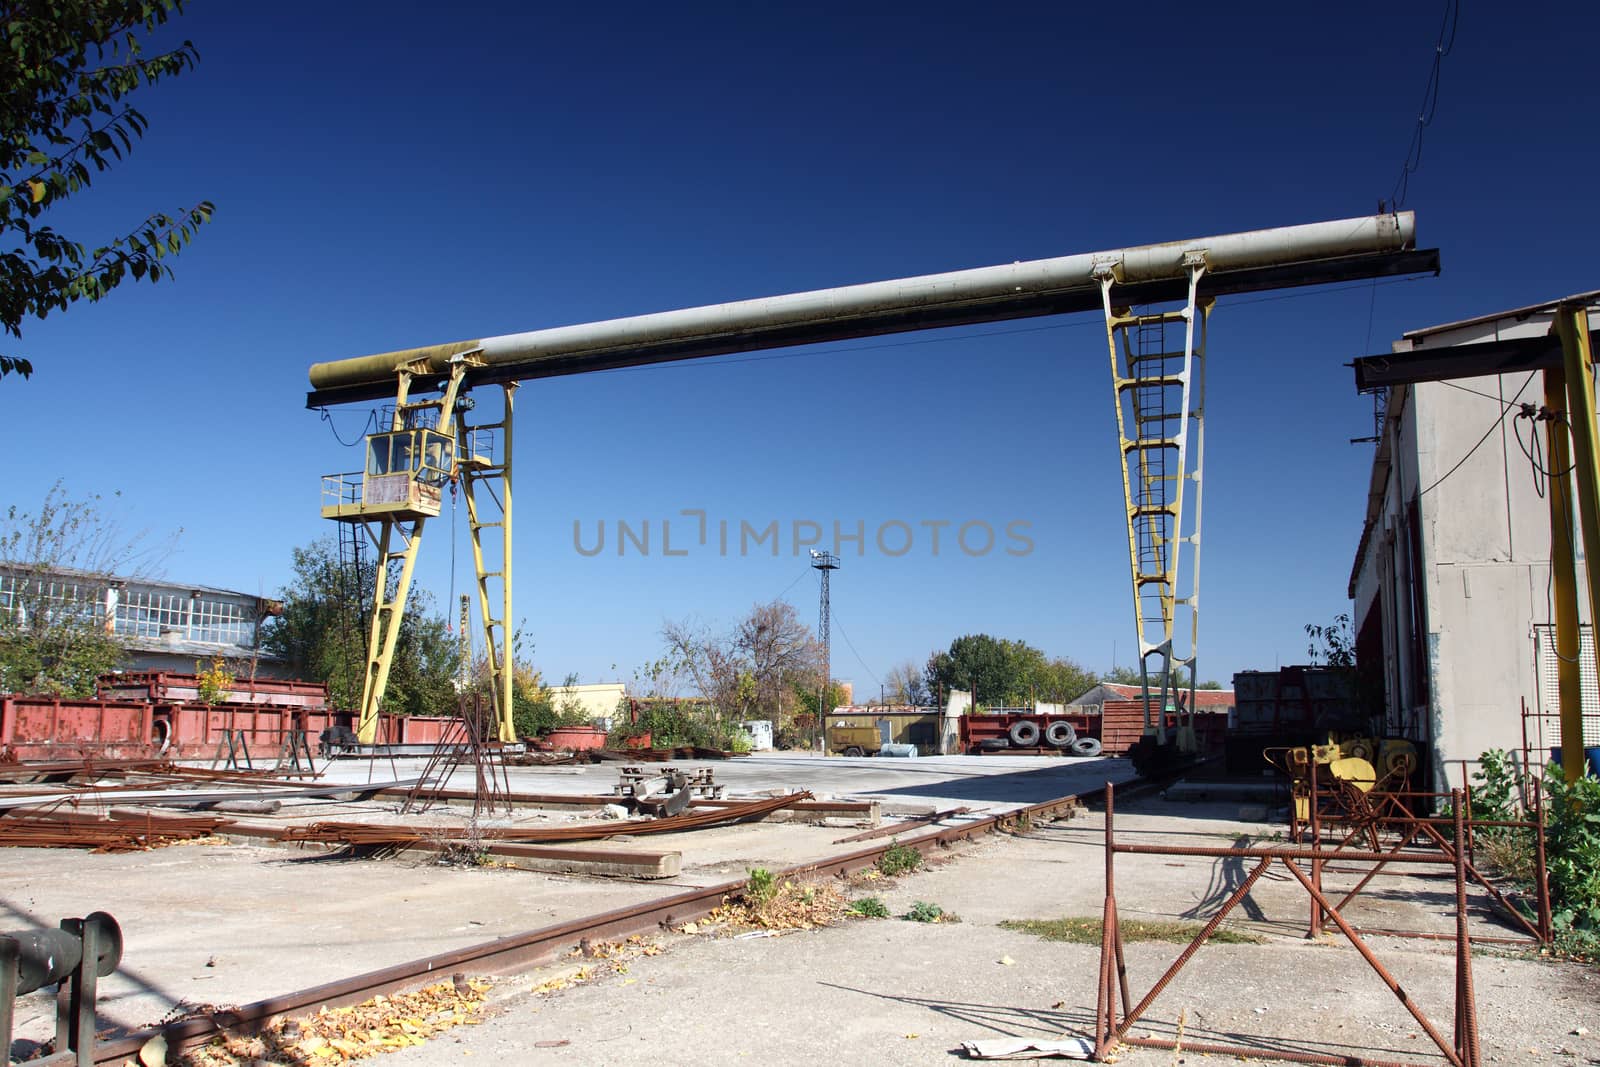 old yellow gantry crane, view from industrial yard